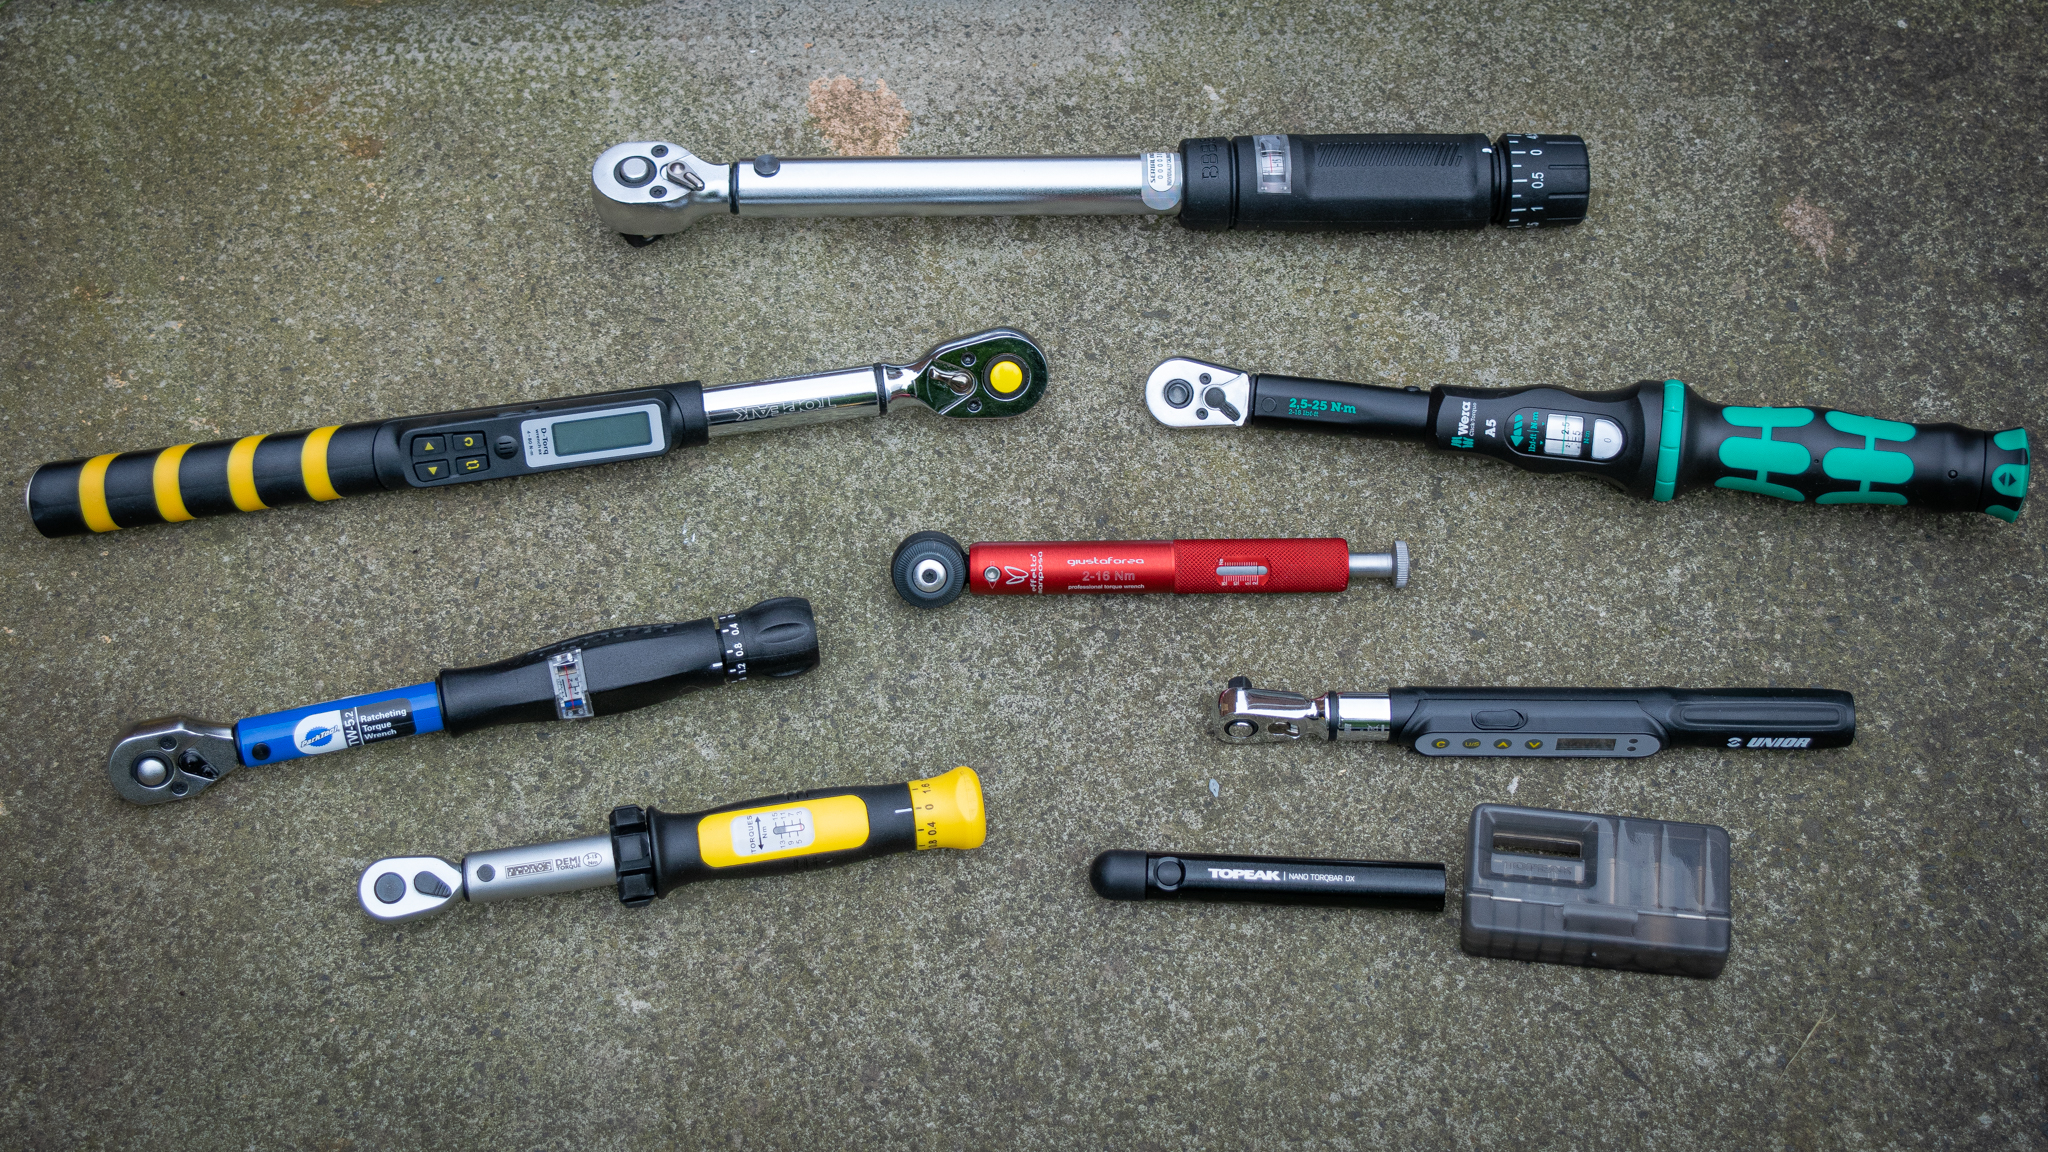 Best torque wrenches for mountain bikers - MBR